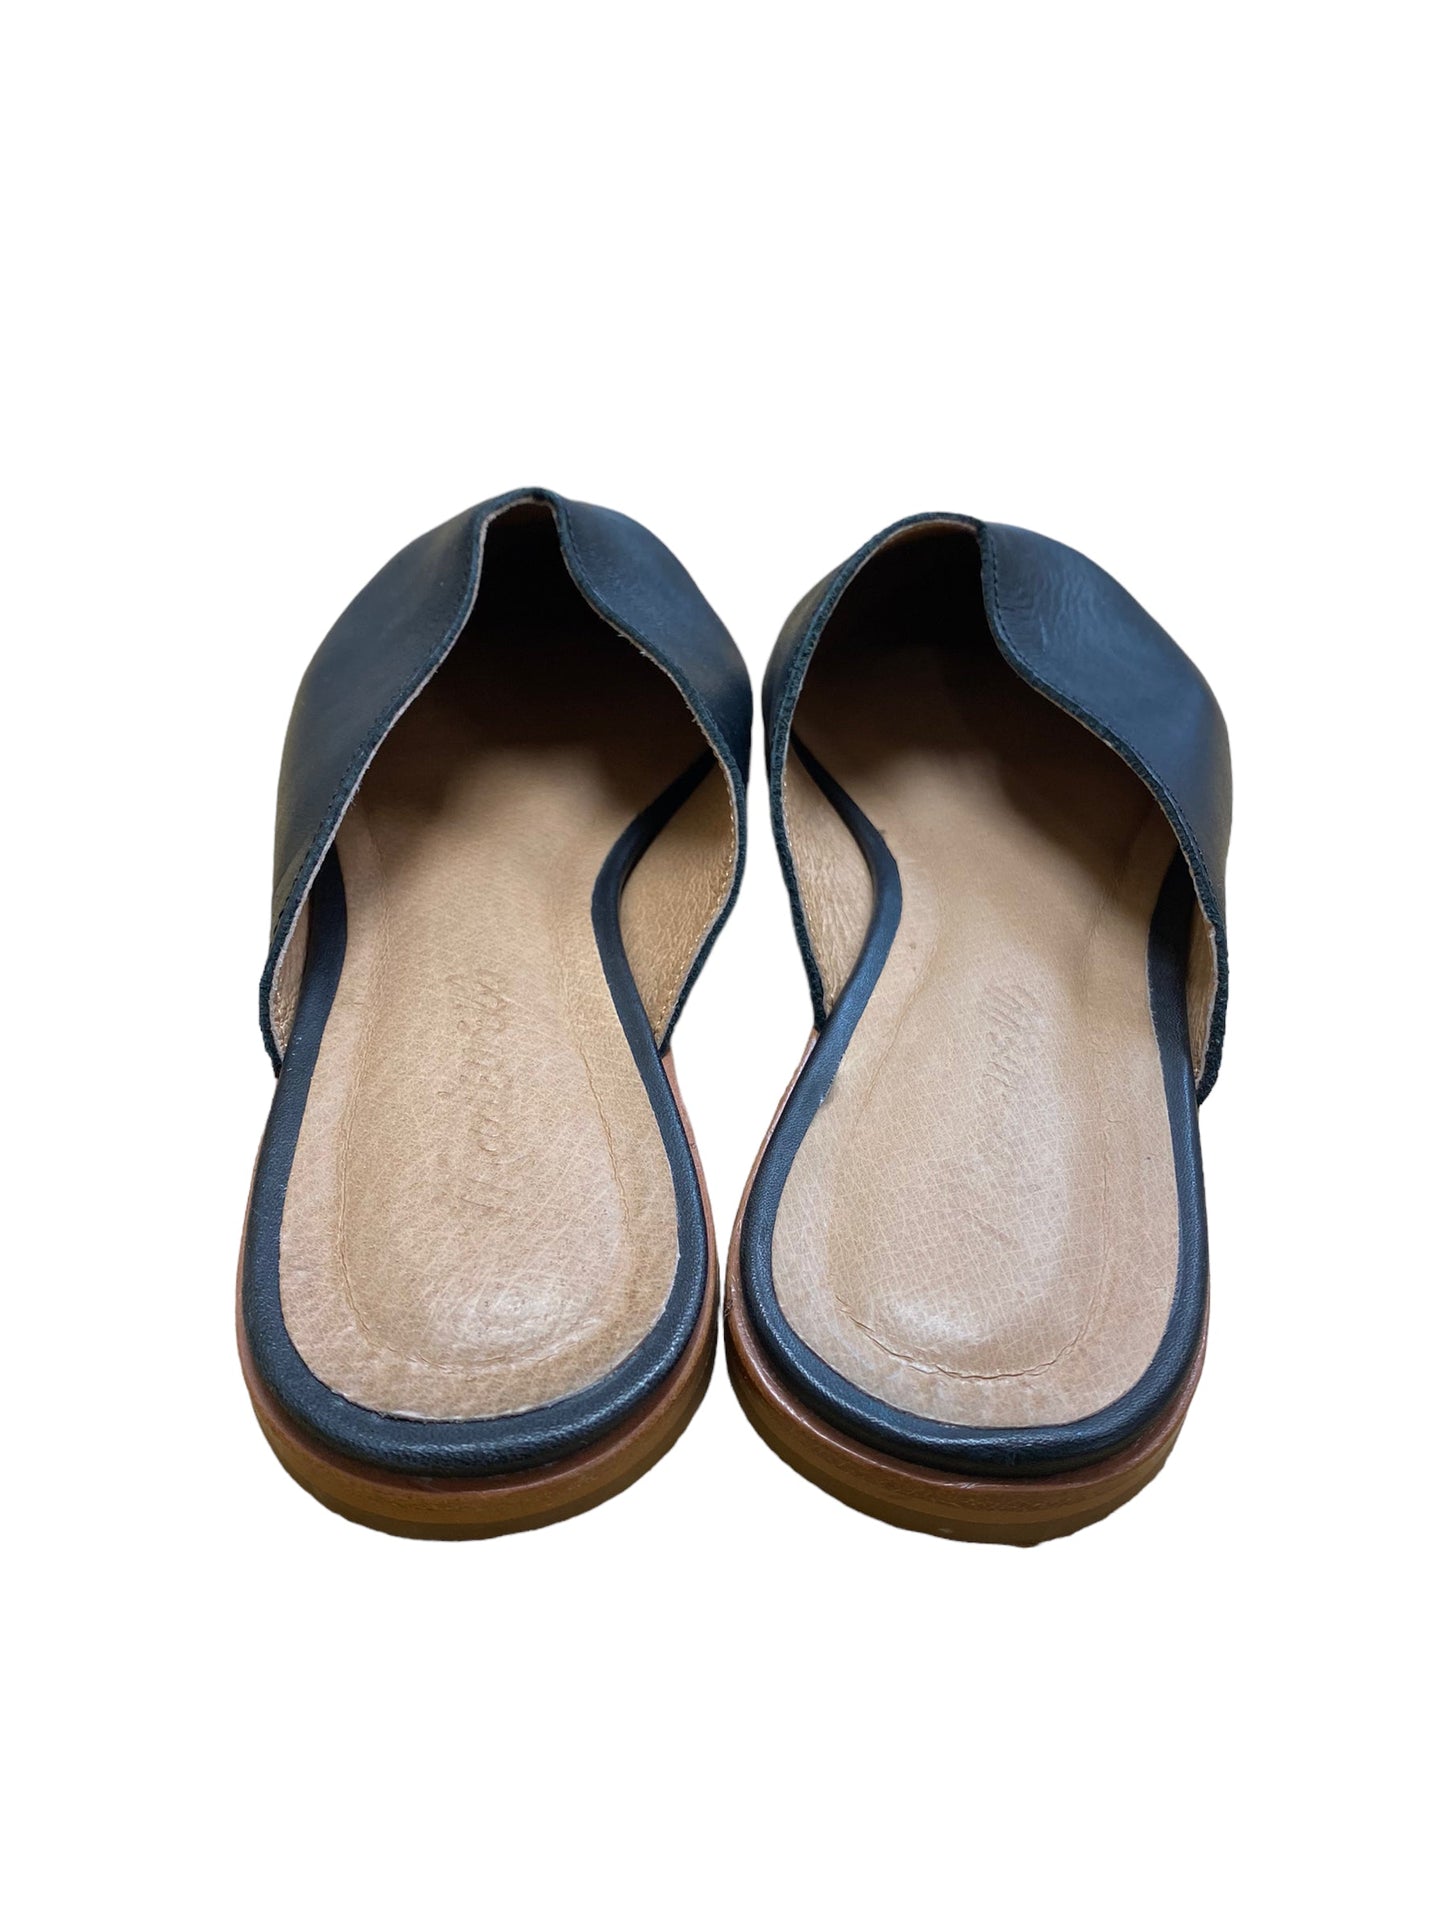 Shoes Flats Mule & Slide By Madewell  Size: 7.5